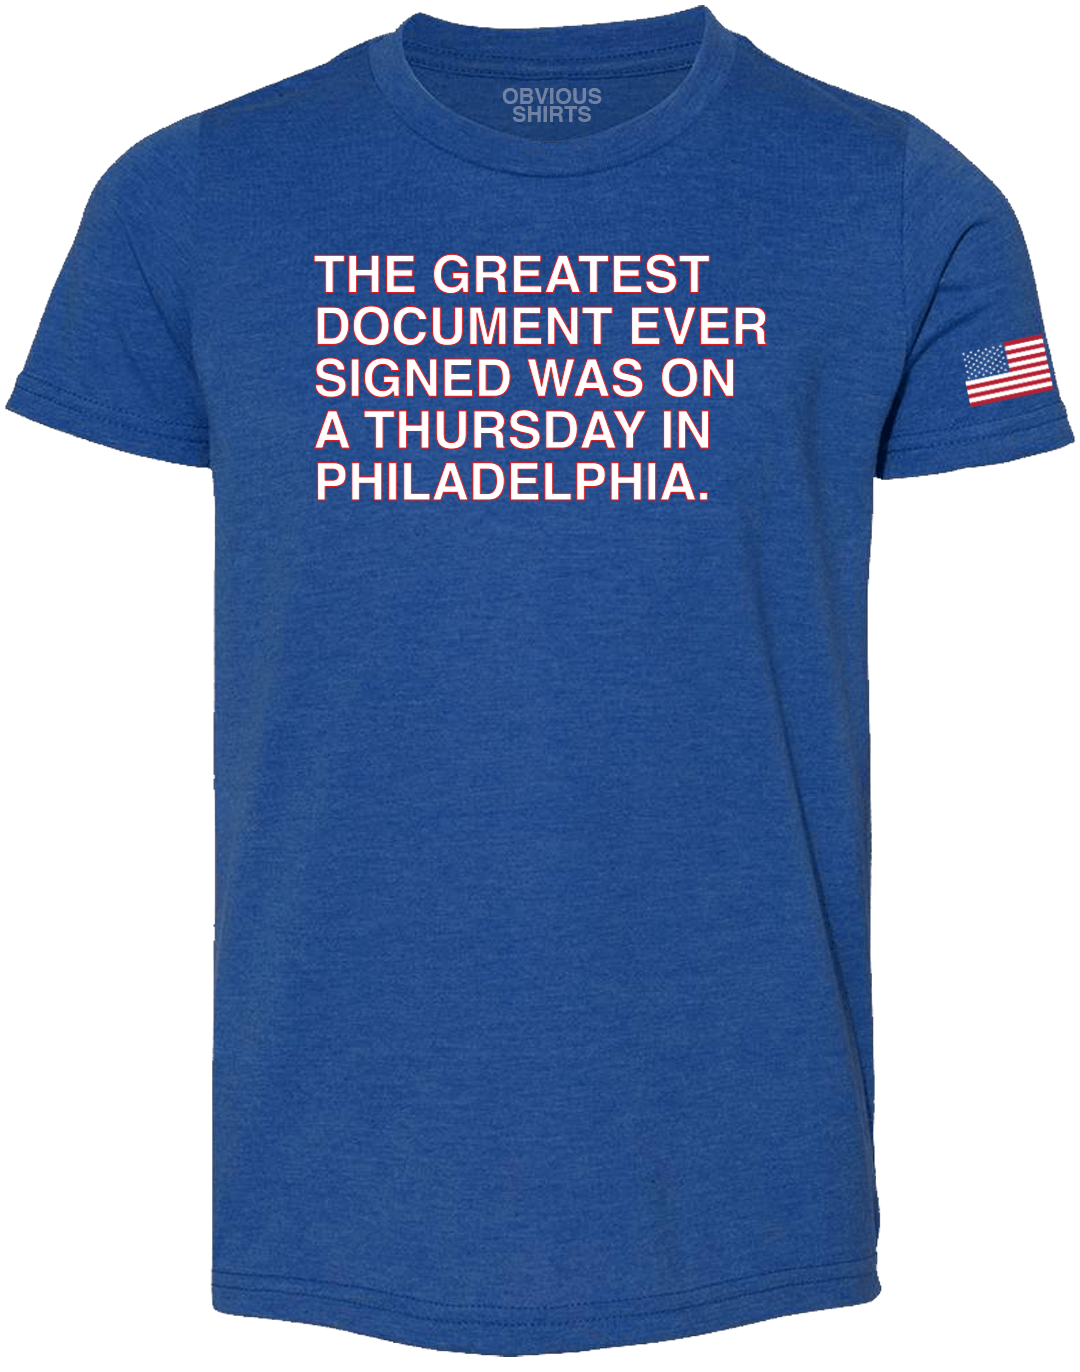 THE GREATEST DOCUMENT EVER SIGNED (YOUTH) - OBVIOUS SHIRTS